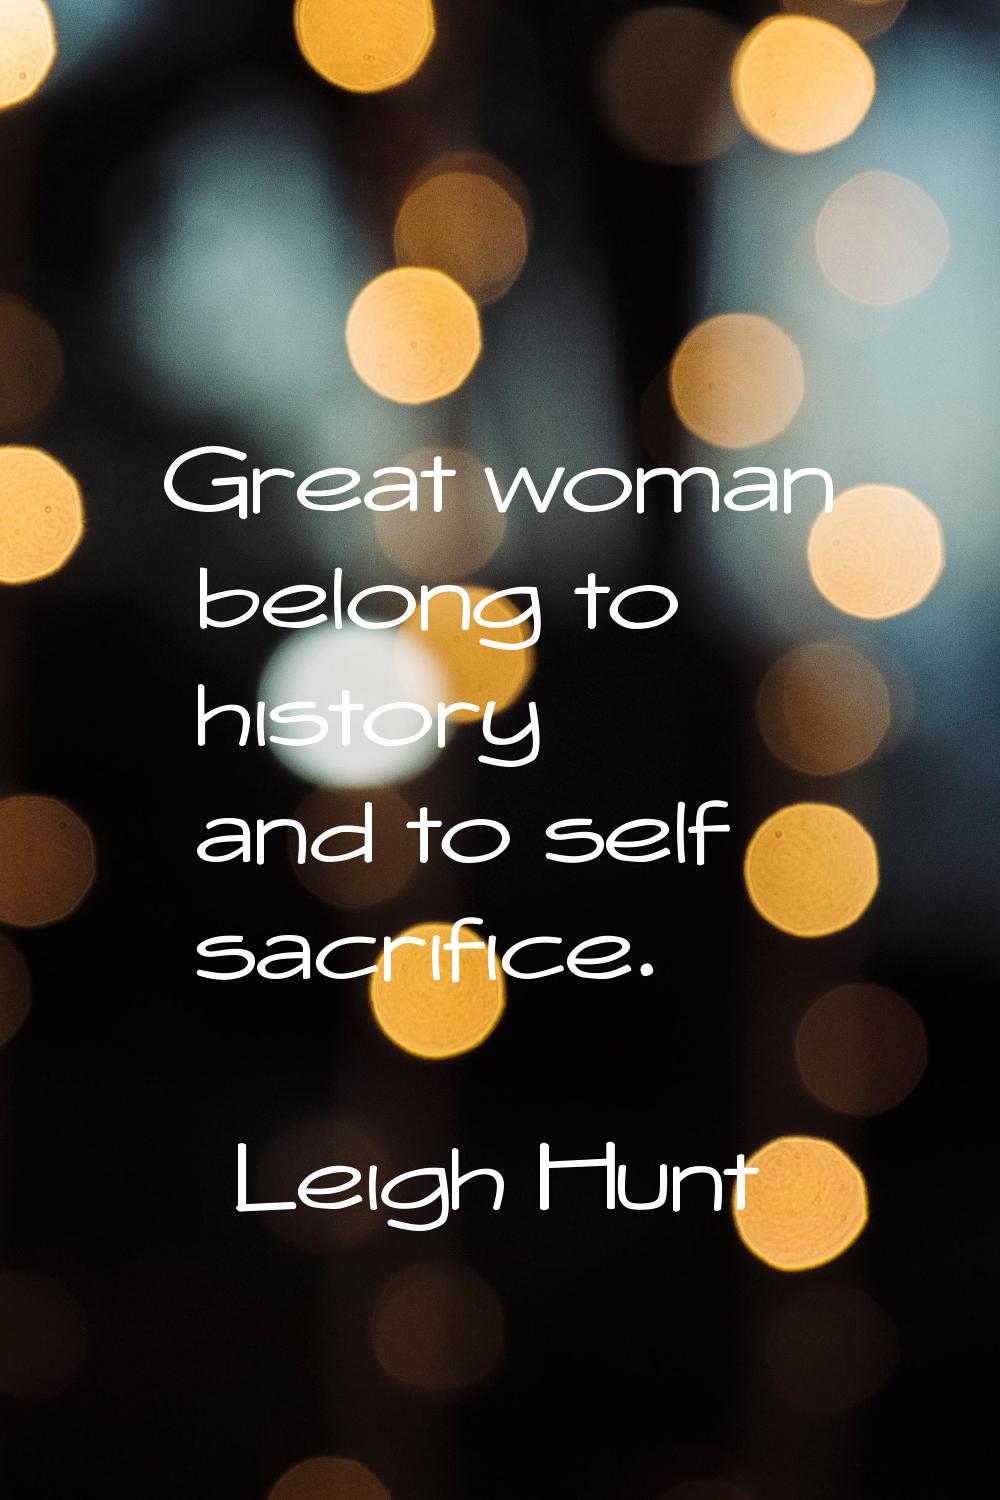 Great woman belong to history and to self sacrifice.